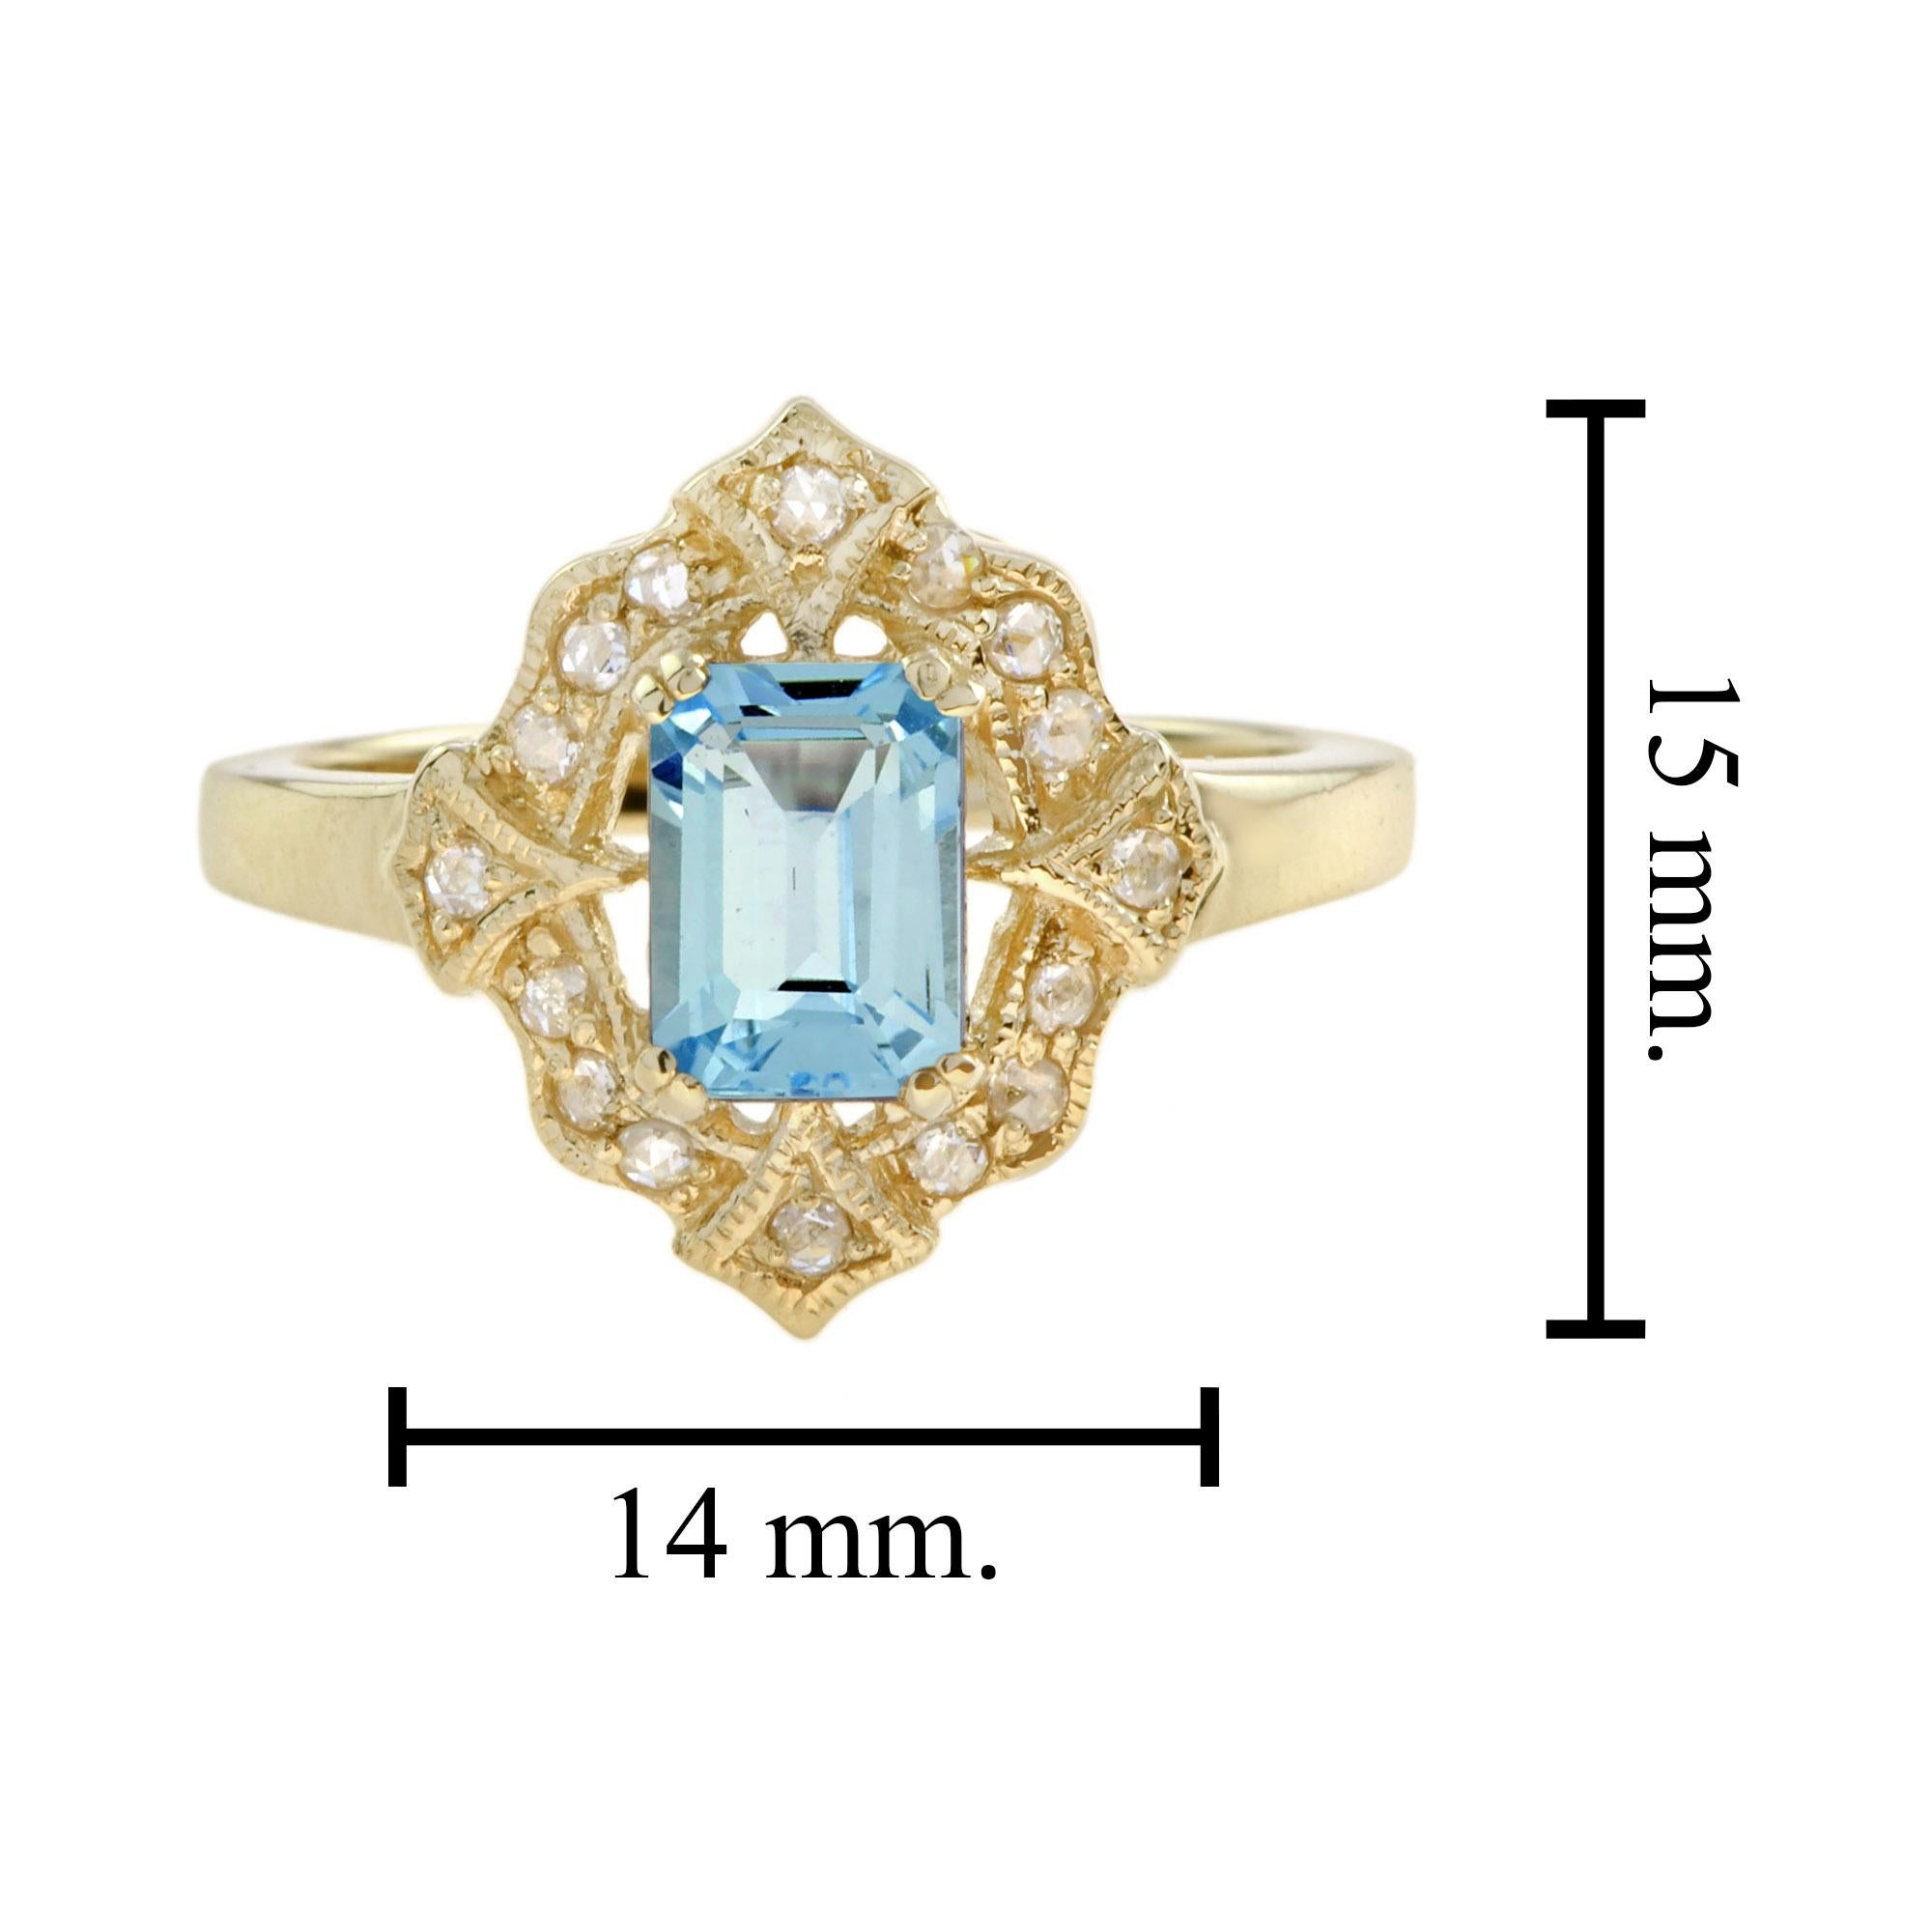 For Sale:  Emerald Cut Blue Topaz and Diamond Halo Vintage Style Ring in 14K Yellow Gold 4